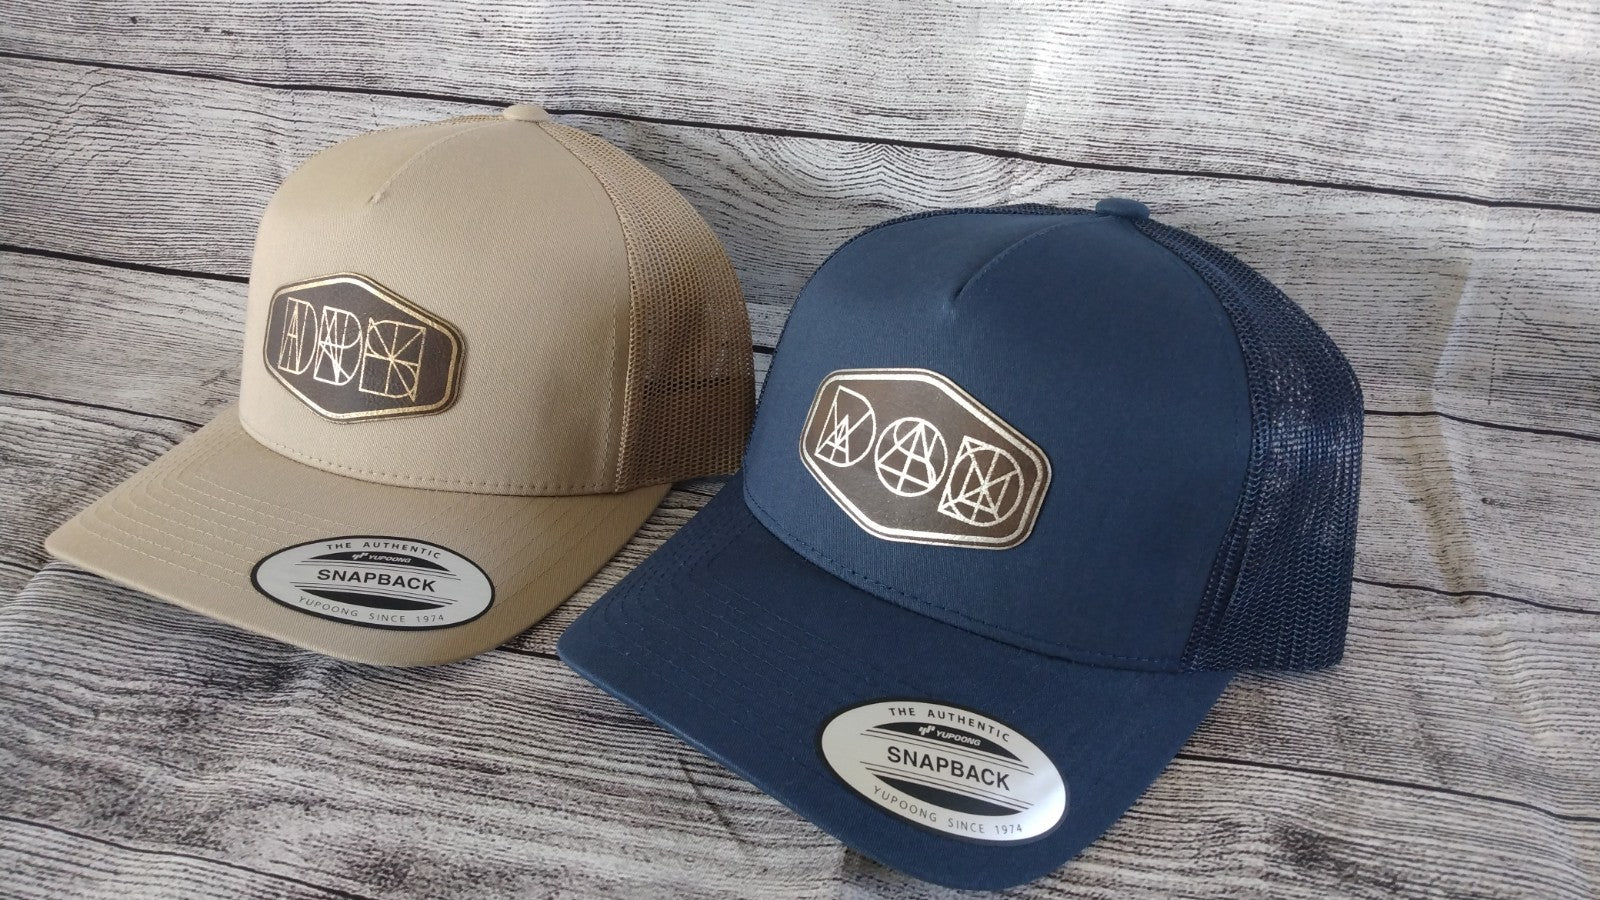 Techsew 830-R sewing patches onto hats . . #customhats